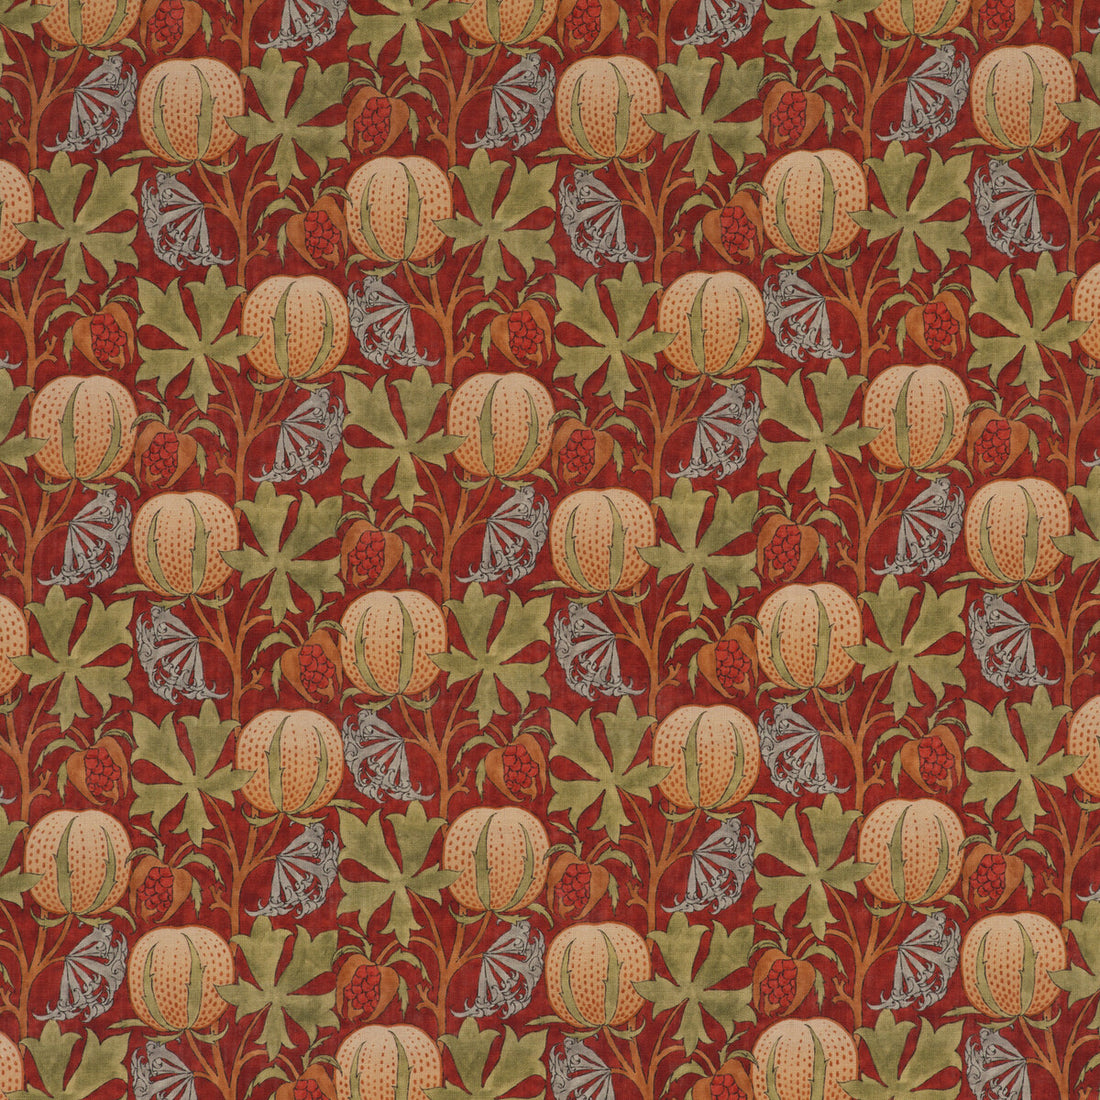 Pumpkins fabric in red/green color - pattern BP10621.2.0 - by G P &amp; J Baker in the Originals V collection